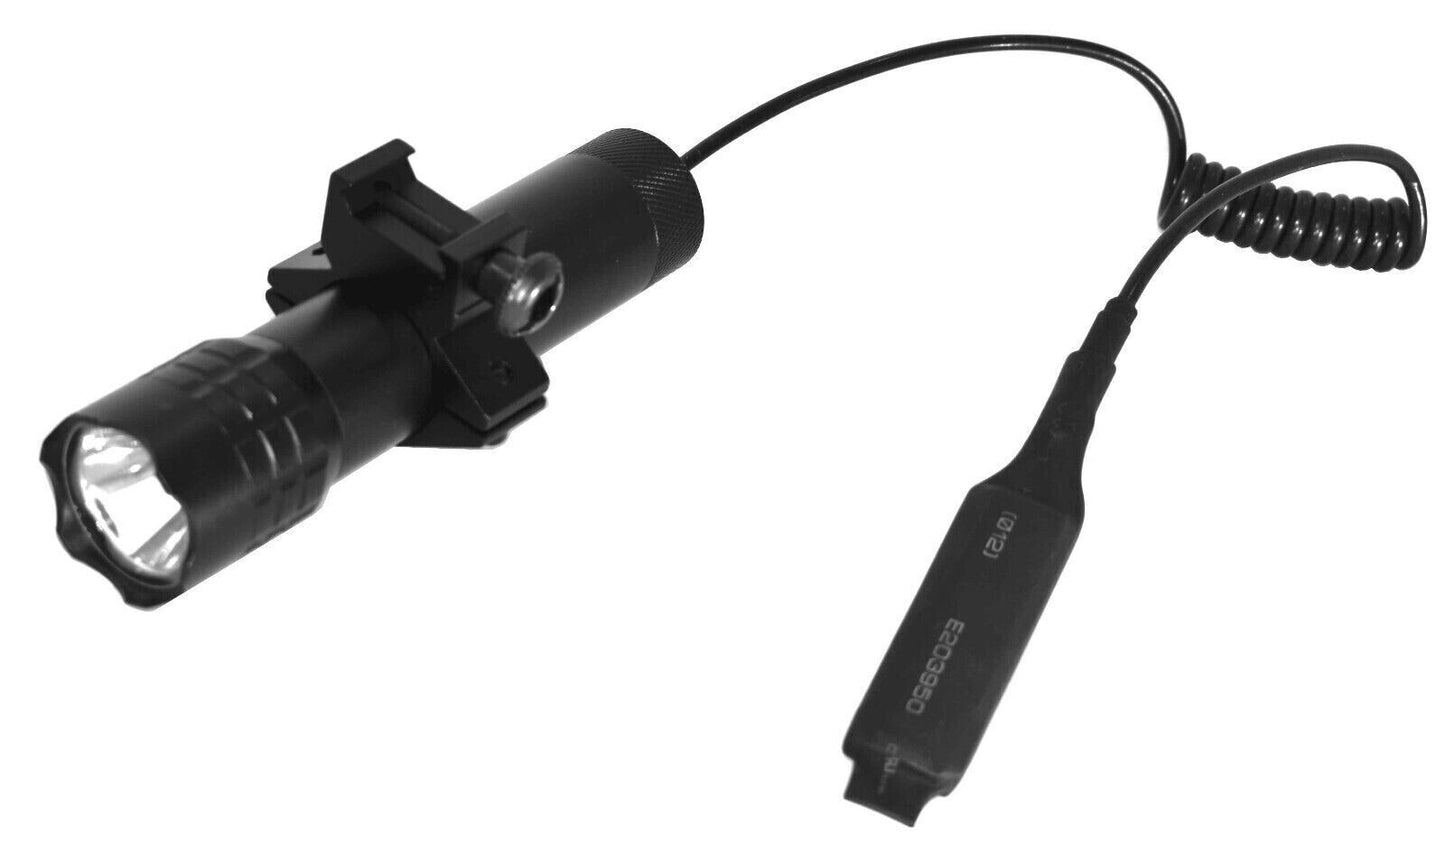 Tactical Flashlight Weaponlight With Gun Mount Wire Cord Switch compatible with tactical paintball guns.